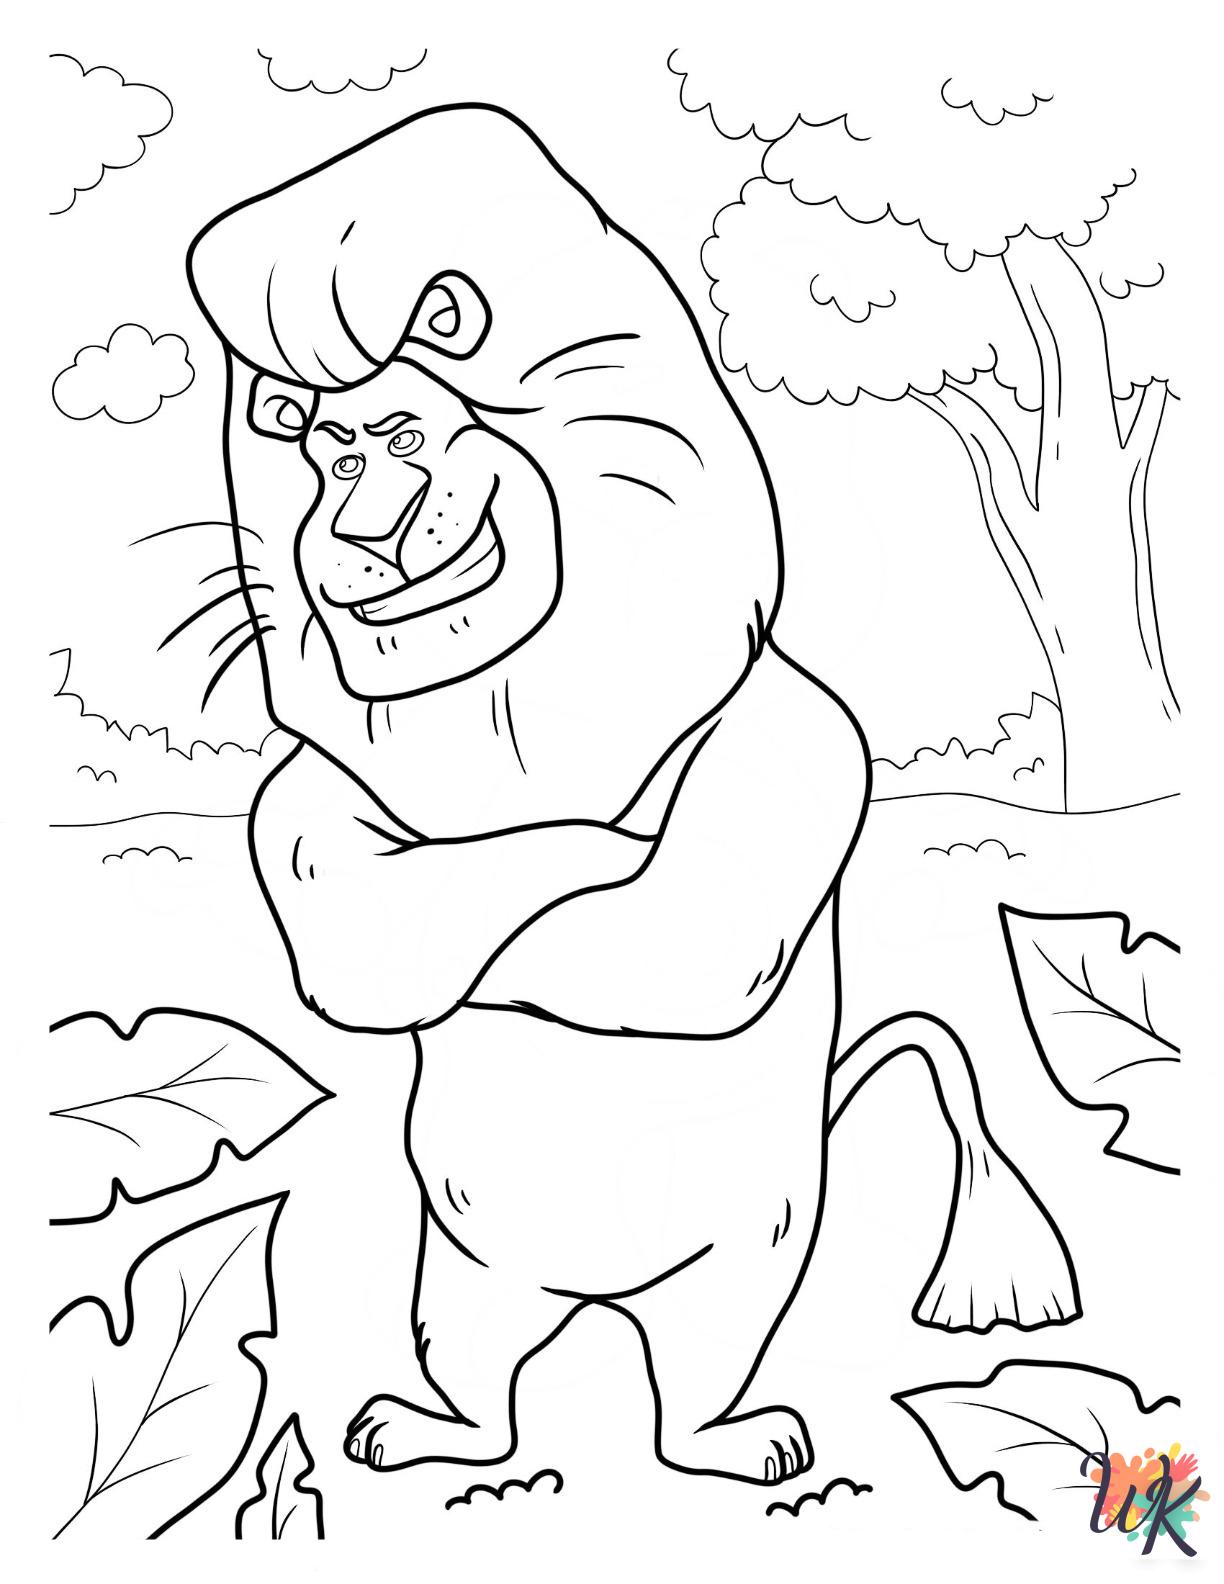 Madagascar adult coloring pages